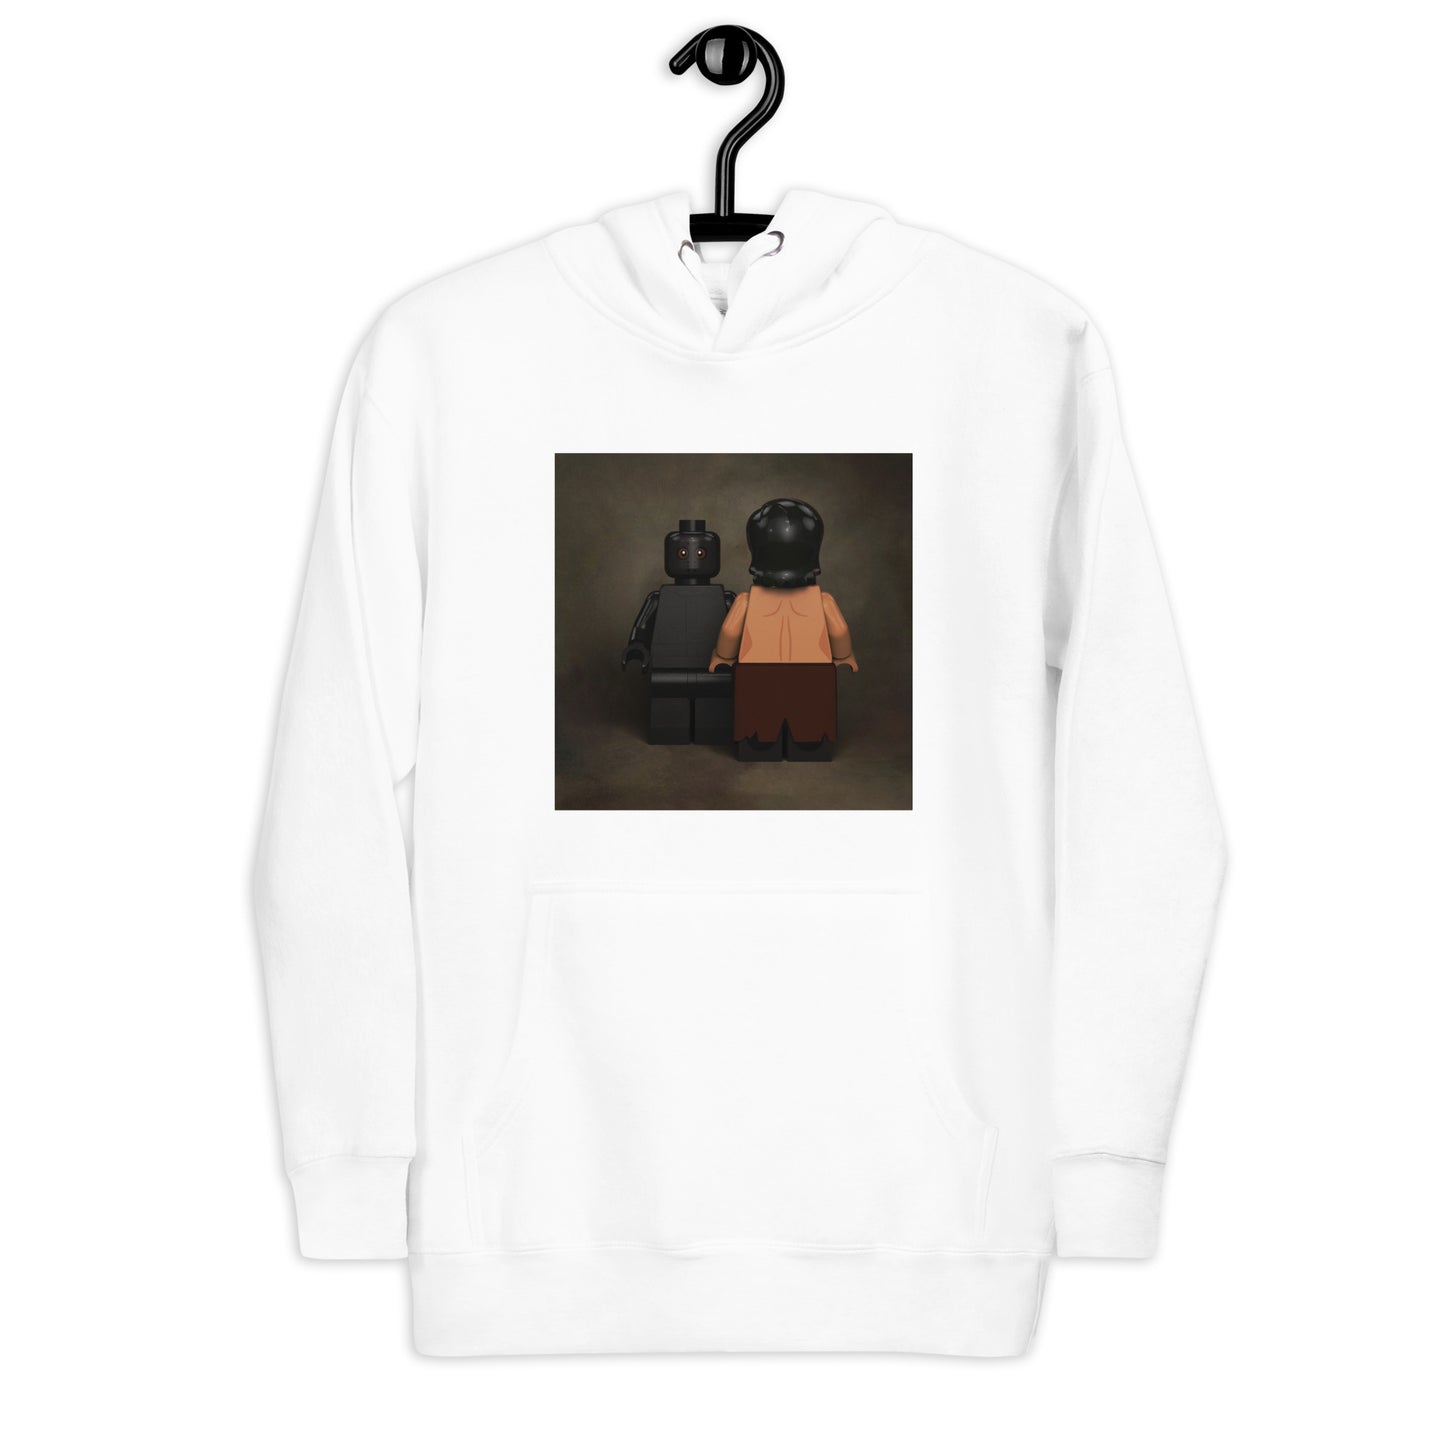 "Kanye West & Ty Dolla $ign - Vultures 1" Lego Parody Hoodie